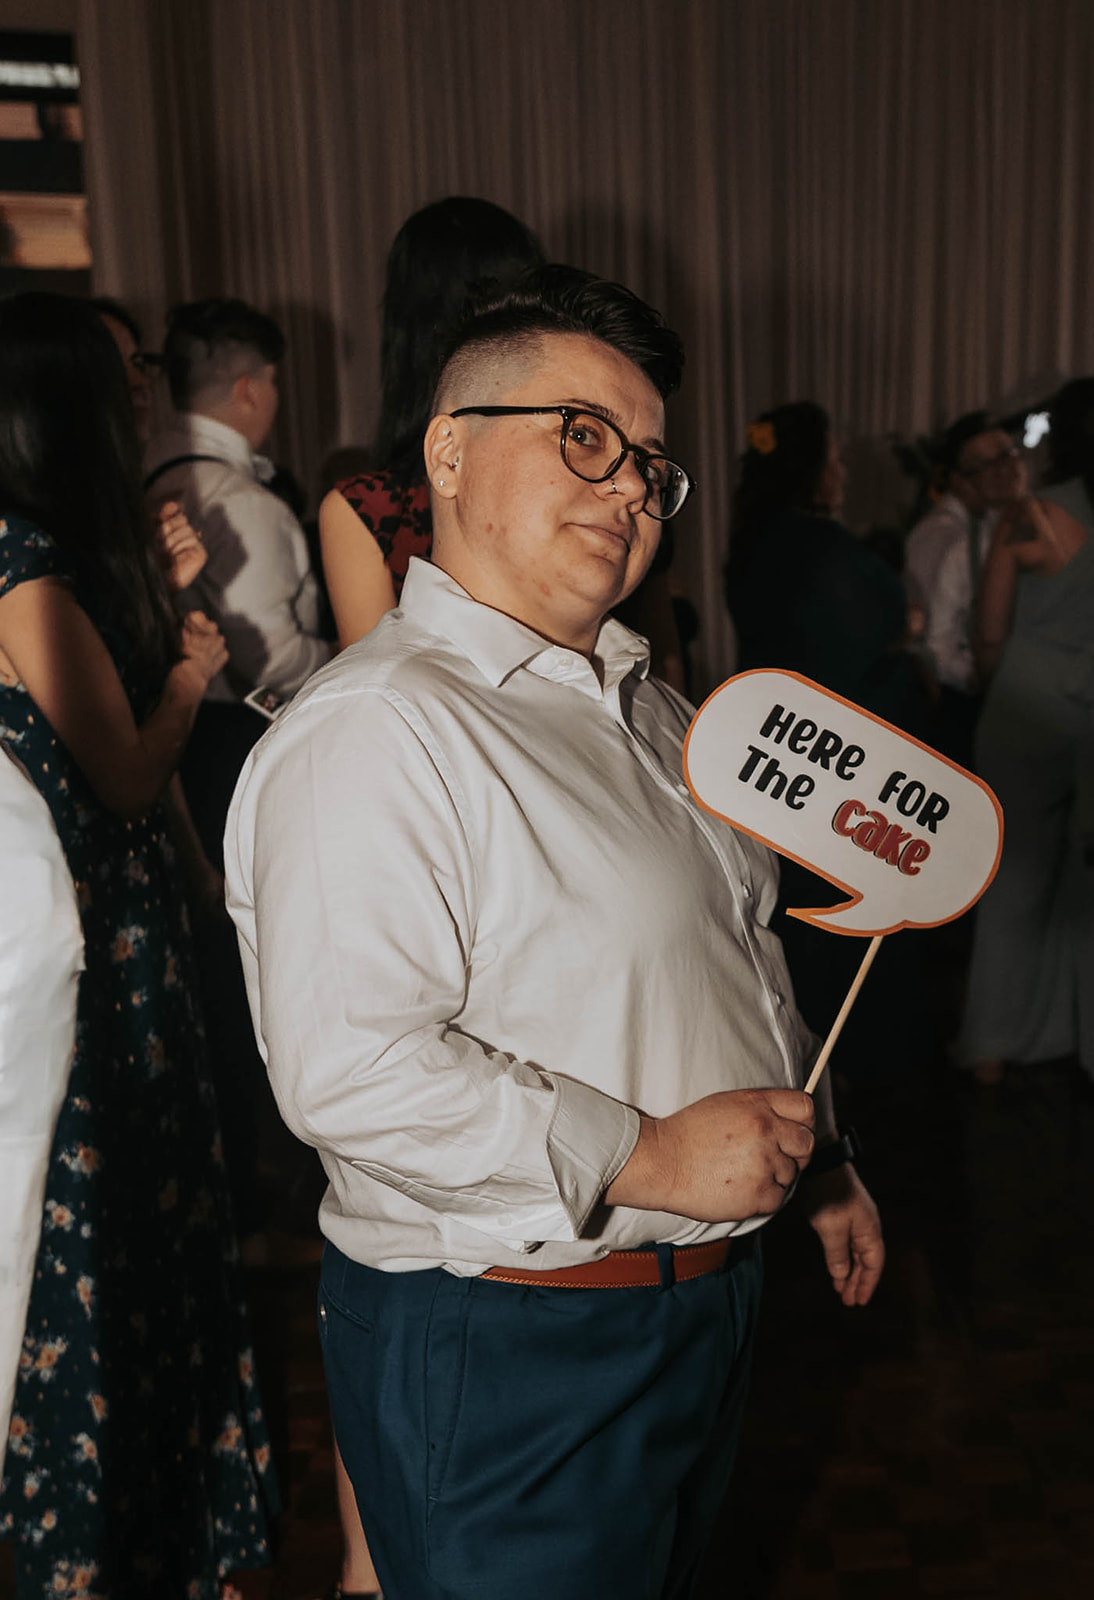 A wedding guest holds a sign that says "I'm just here for the cake" 